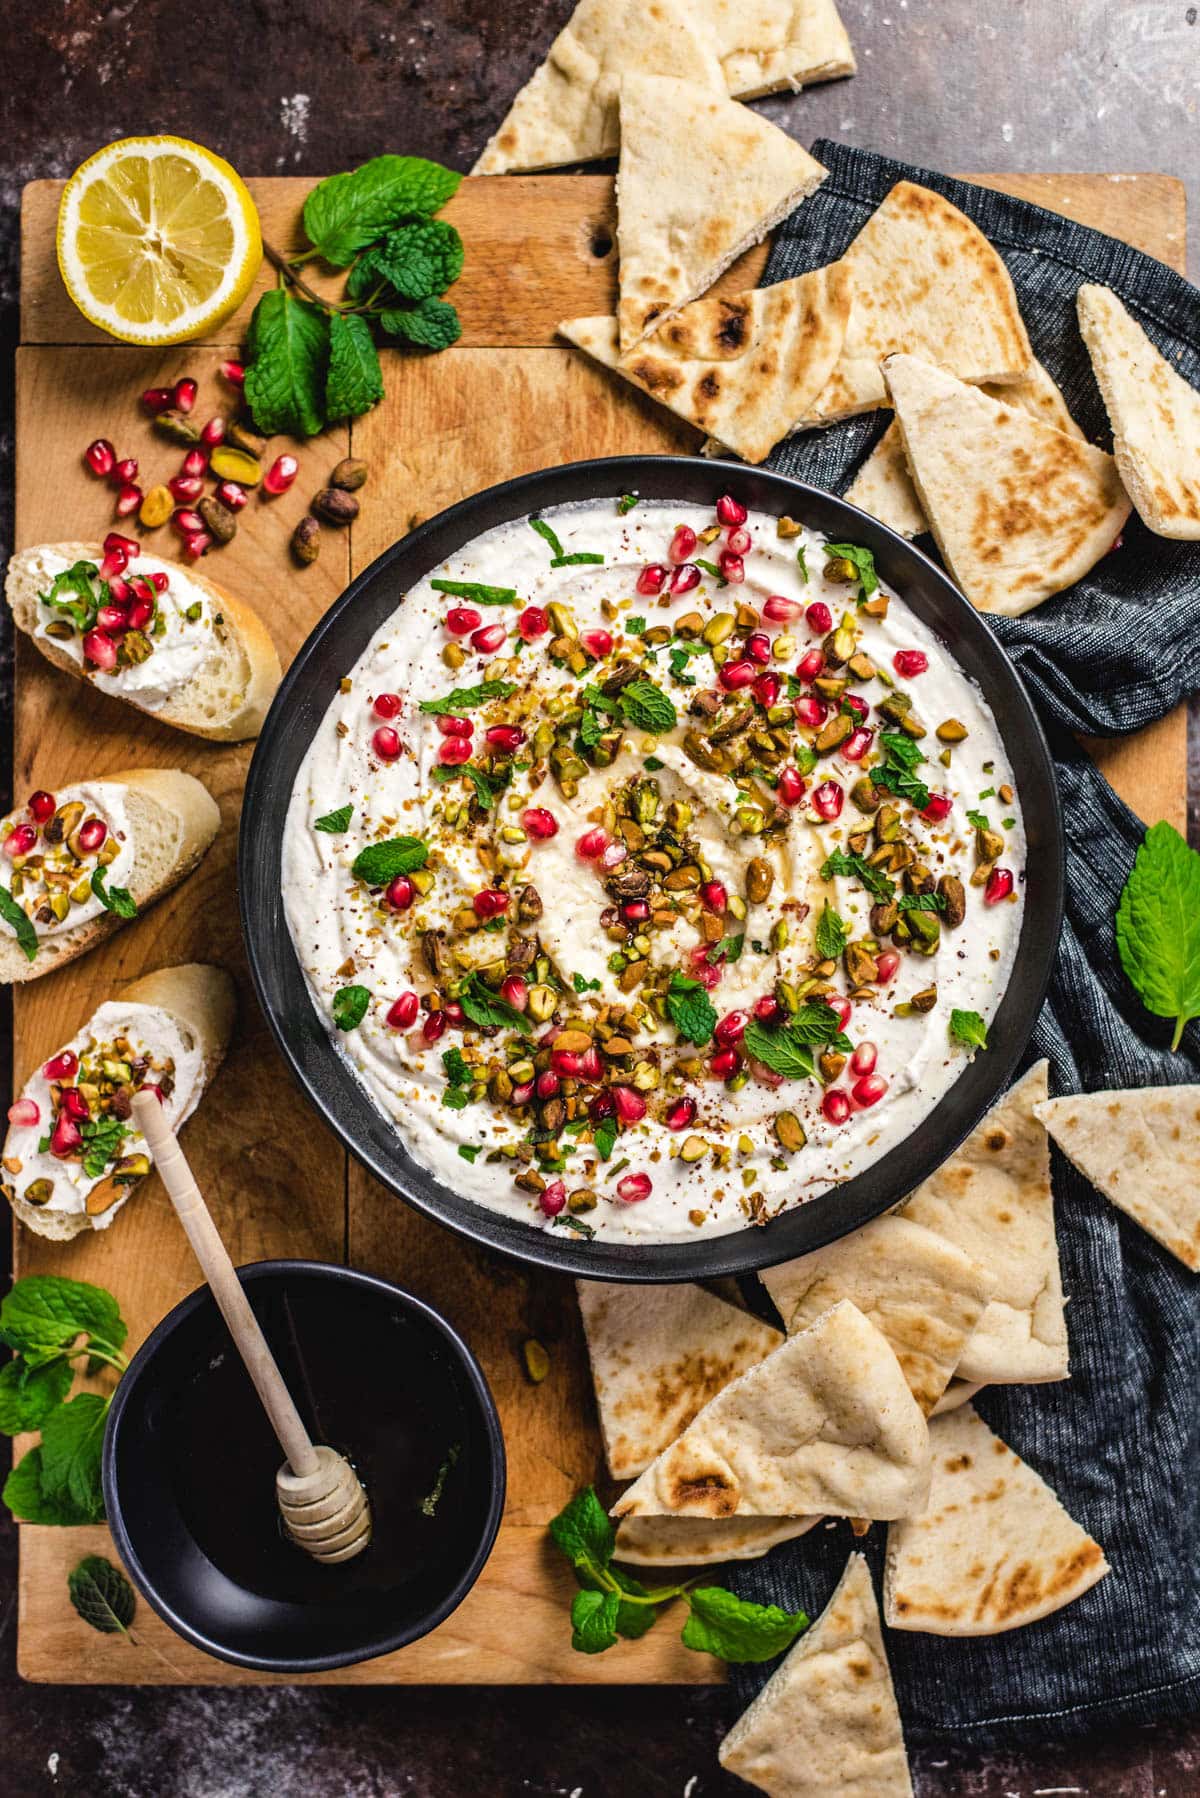 An overhead picture of a bowl of Honey-Whipped Feta Dip. The bowl is black and the dip has been swirled in the bowl and topped with honey, bright red pomegranate seeds, green pistachios, and fresh mint leaves. It's surrounded by pita bread and crusty bread.